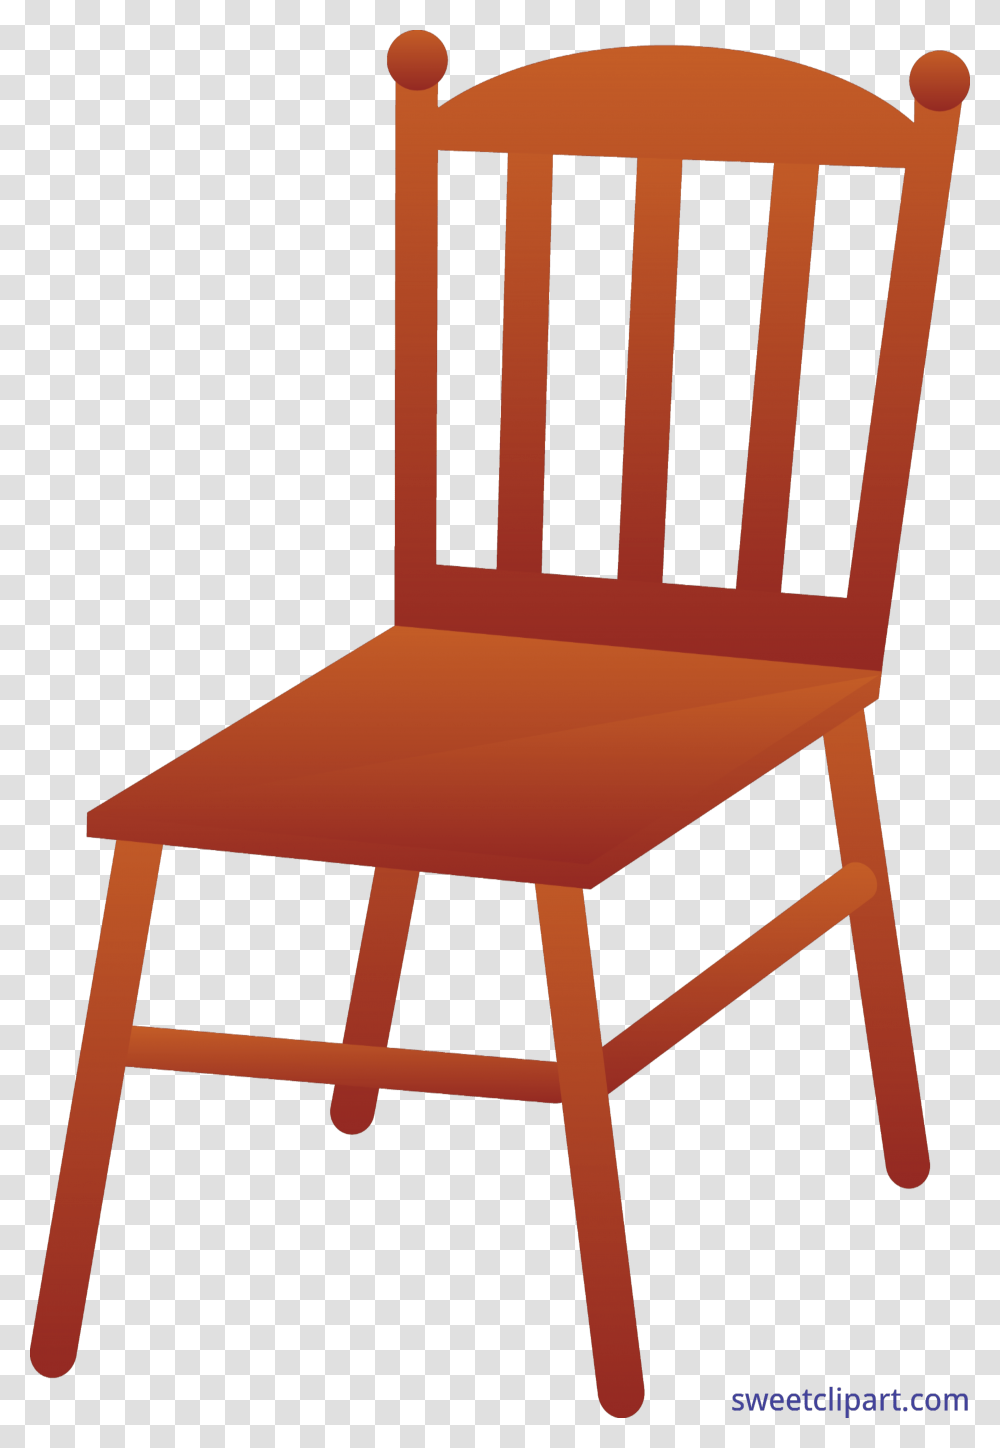 Park Bench Clipart Chairs Clipart, Furniture Transparent Png